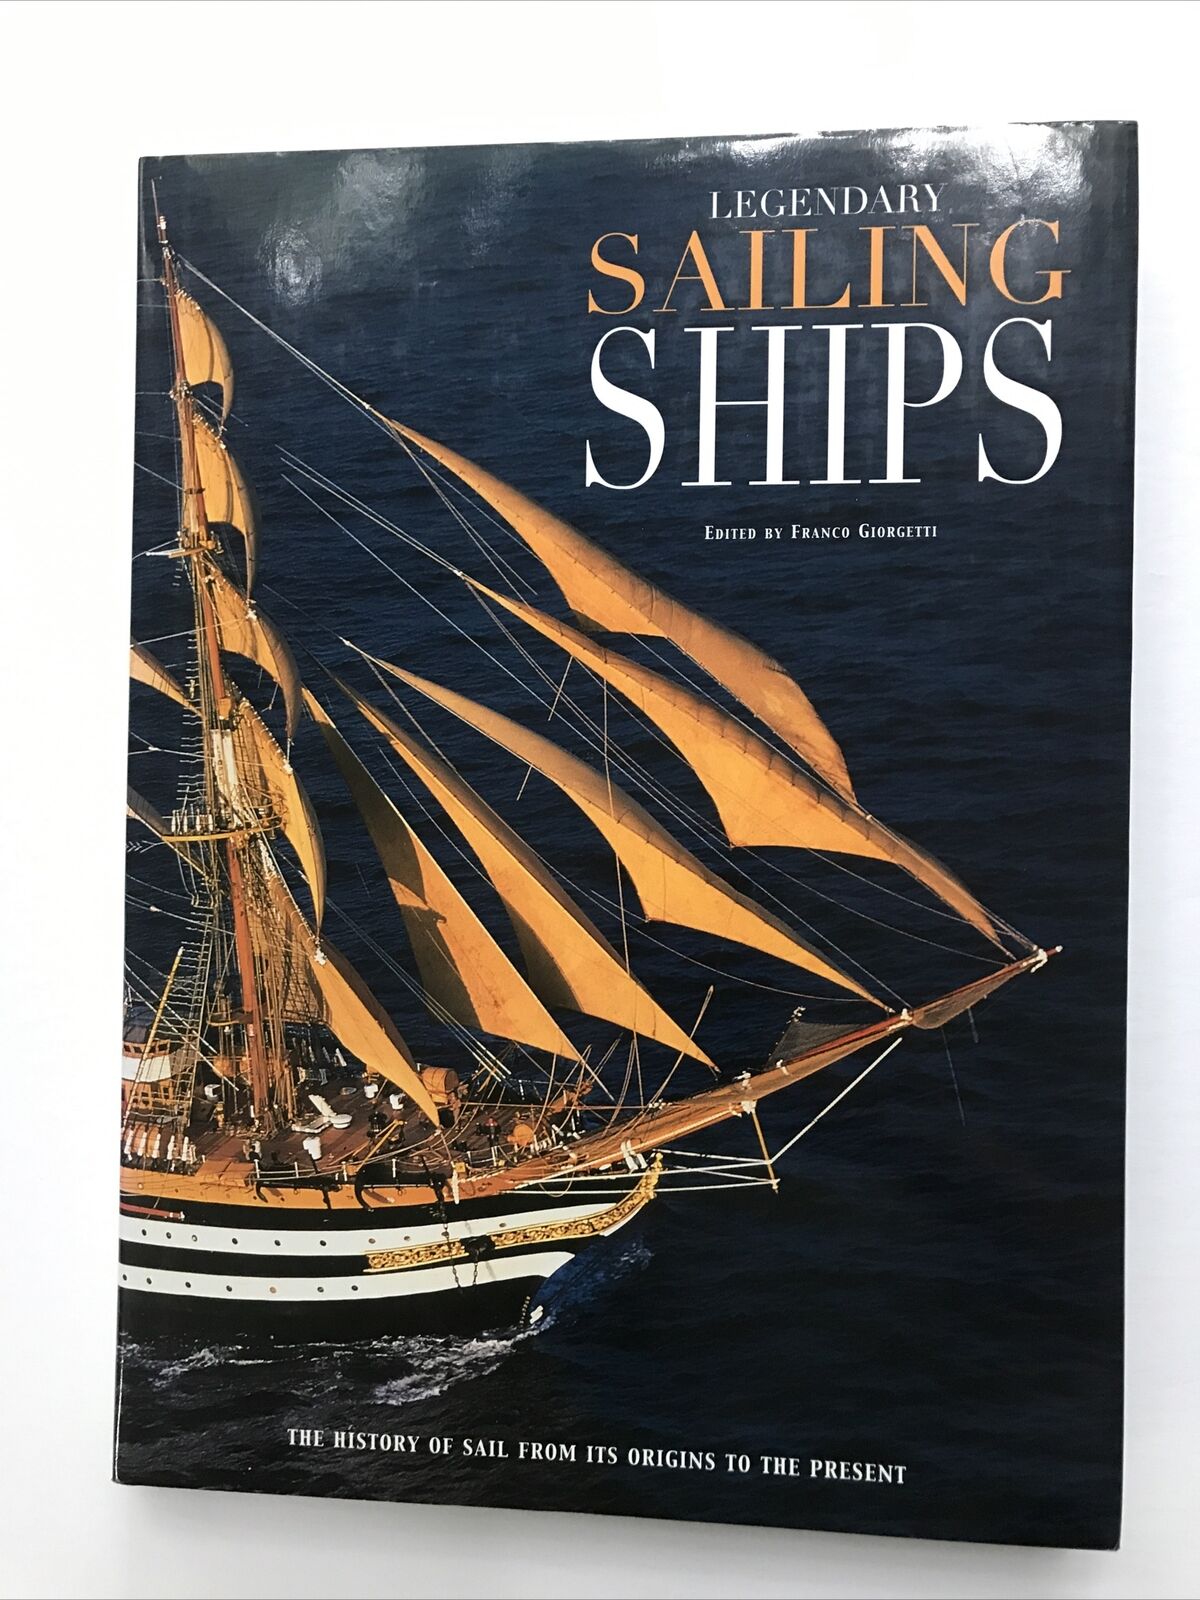 LEGENDARY SAILING SHIPS by Franco Giorgetti Hardcover 2007 Edition New  reduced